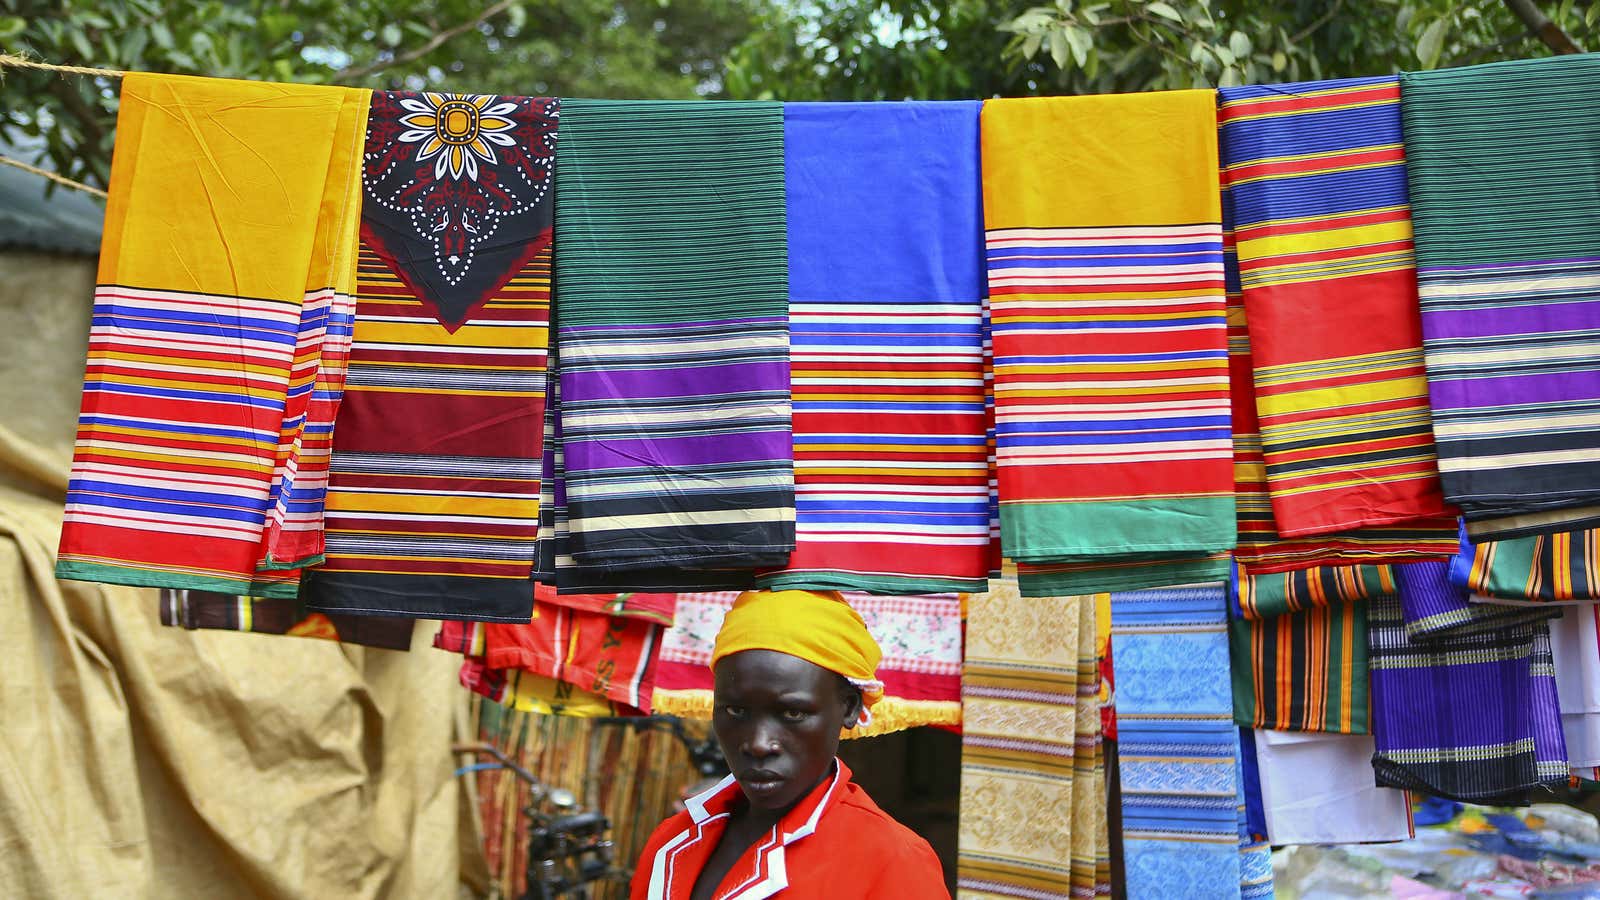 A trader from Bunia in eastern Democratic Republic of Congo sells fabric at a market at the Kyangwali refugee settlement in Hoima district in Western Uganda